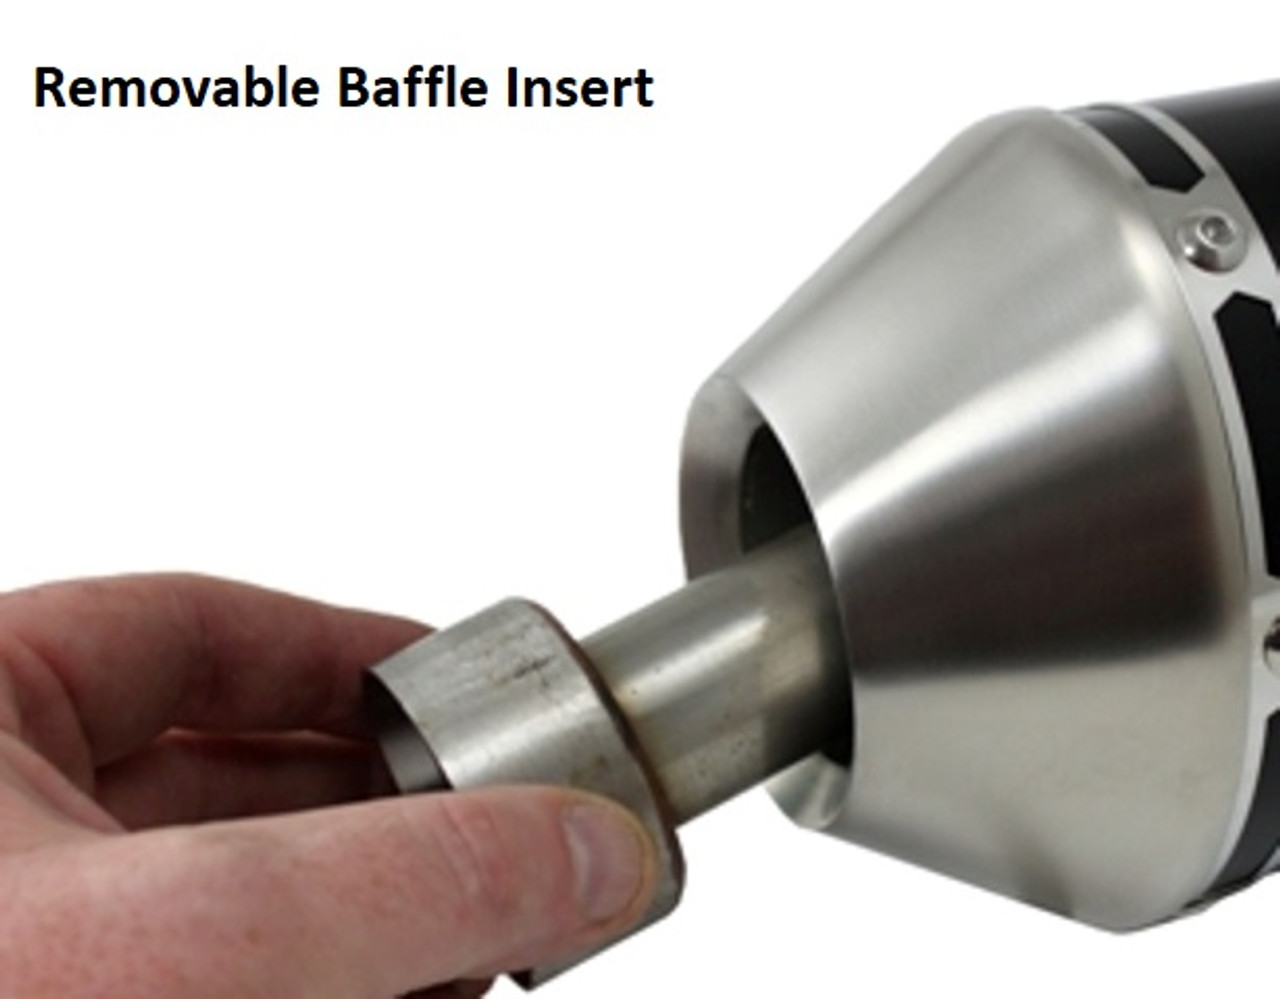 Removable Baffle Insert